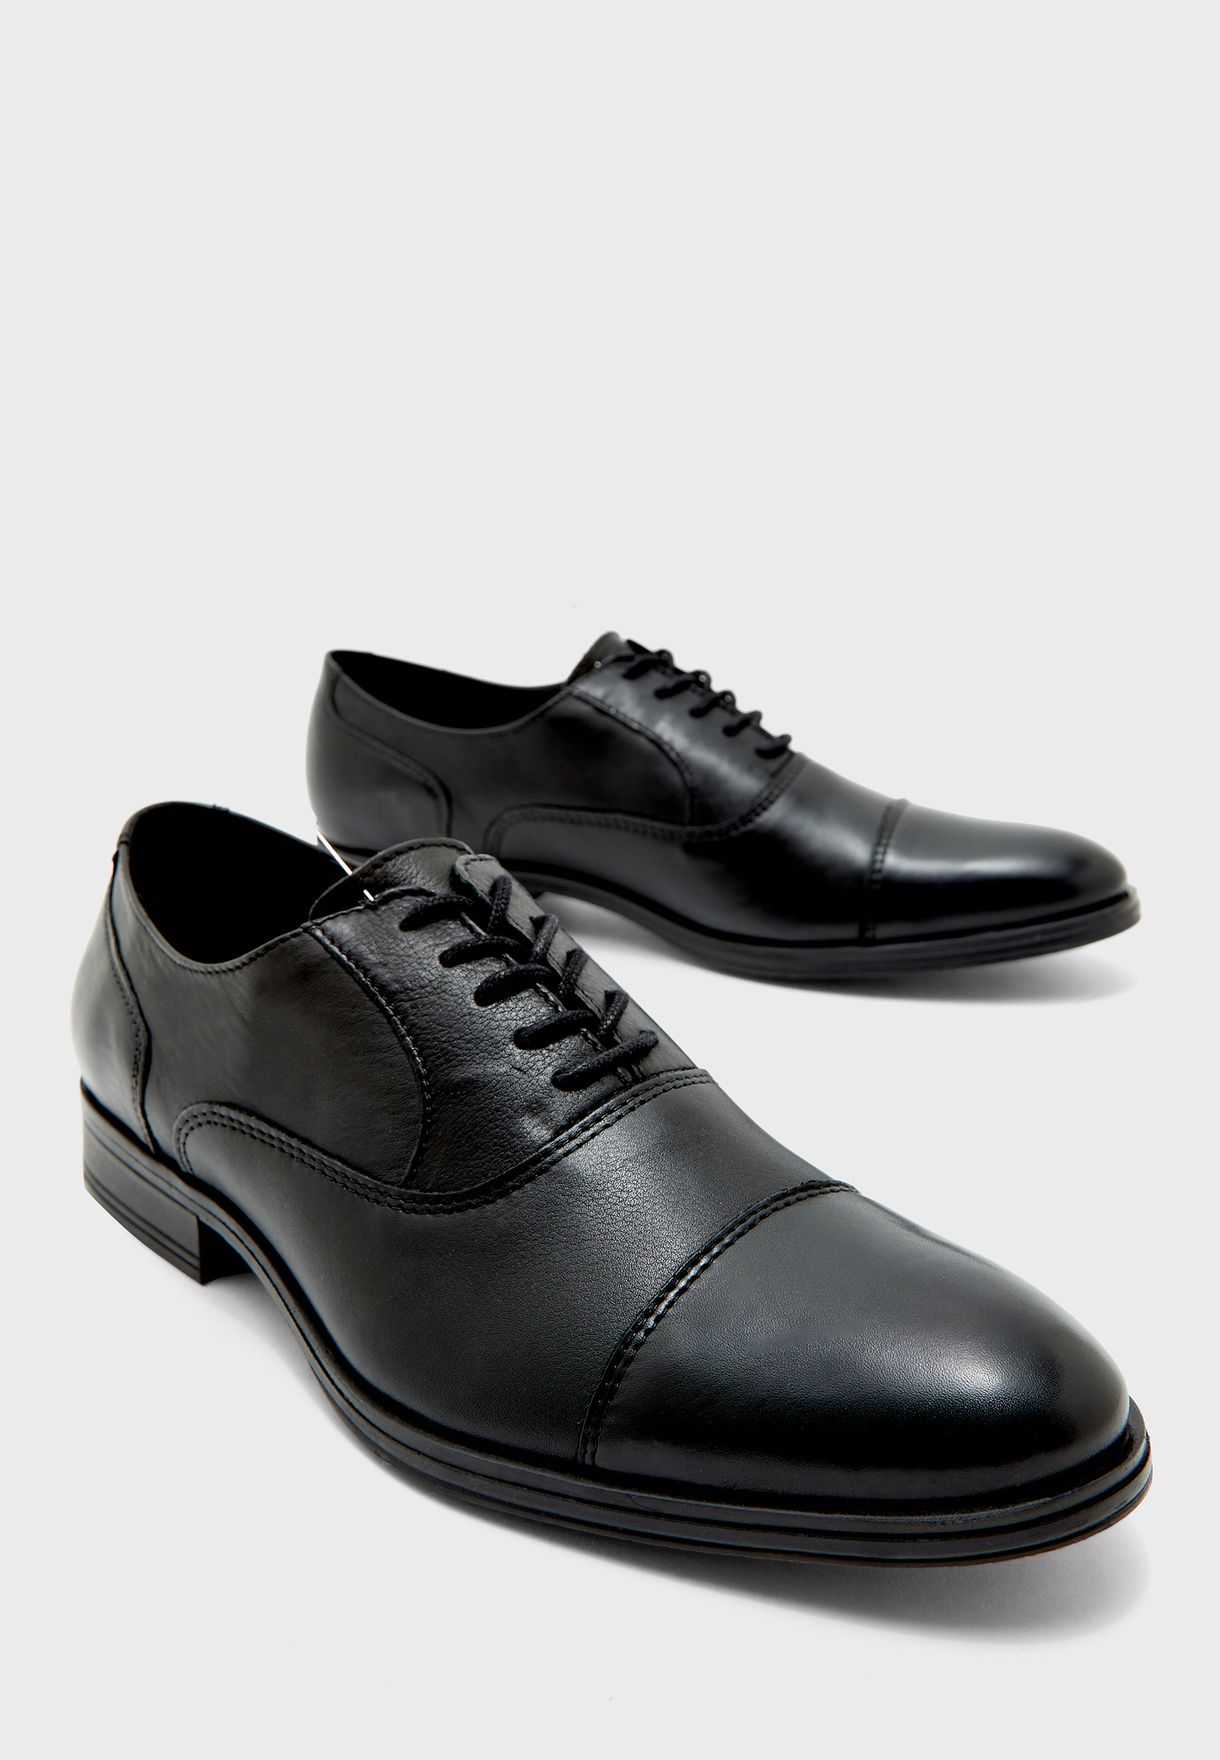 oxford lace ups